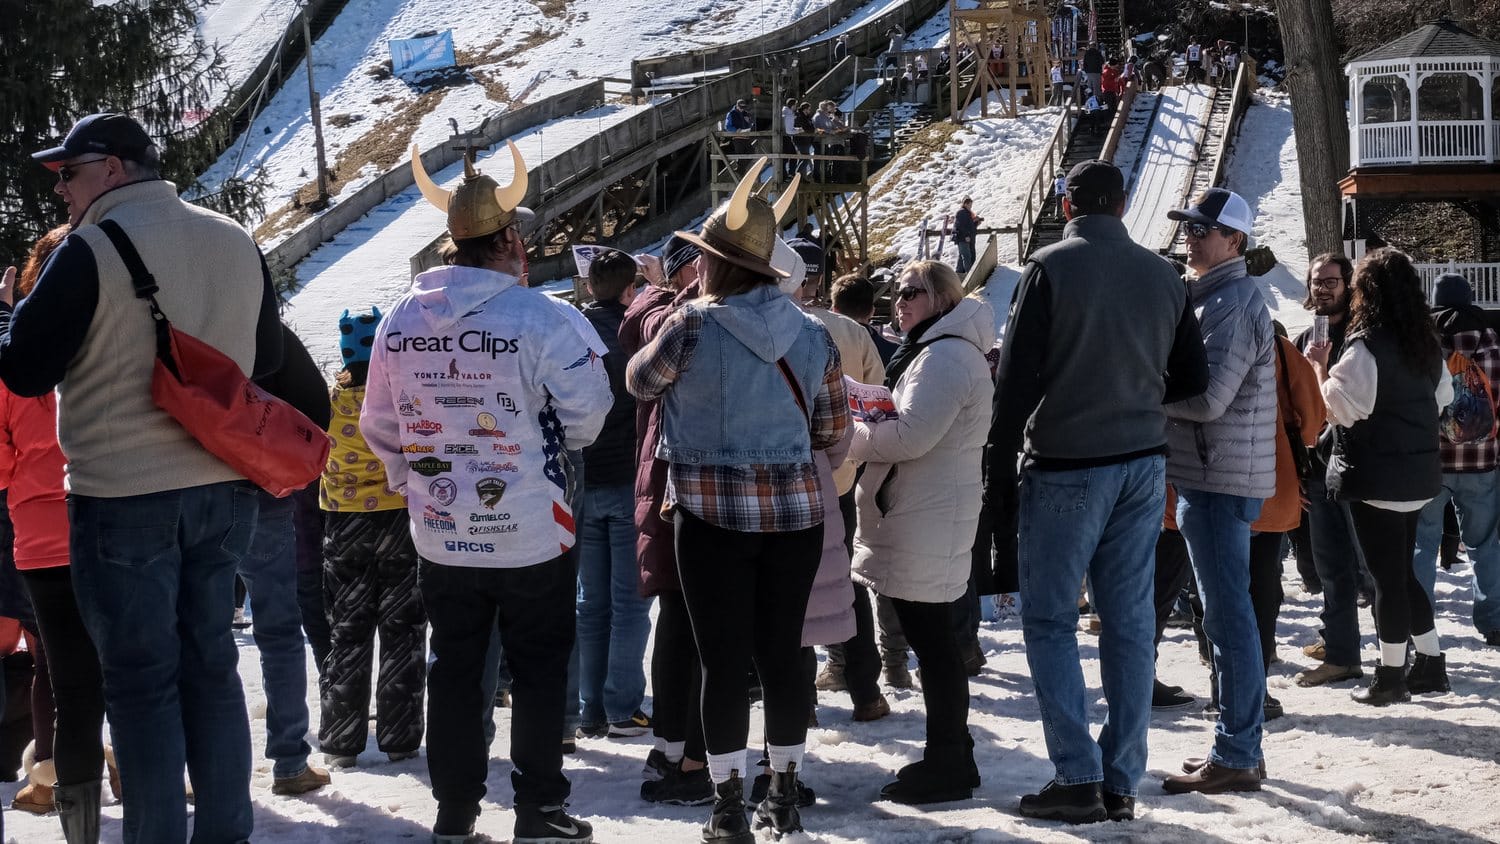 Spectators watching the 5m jumps at the 118th annual Norge Ski Club, winter tournament, 2023.